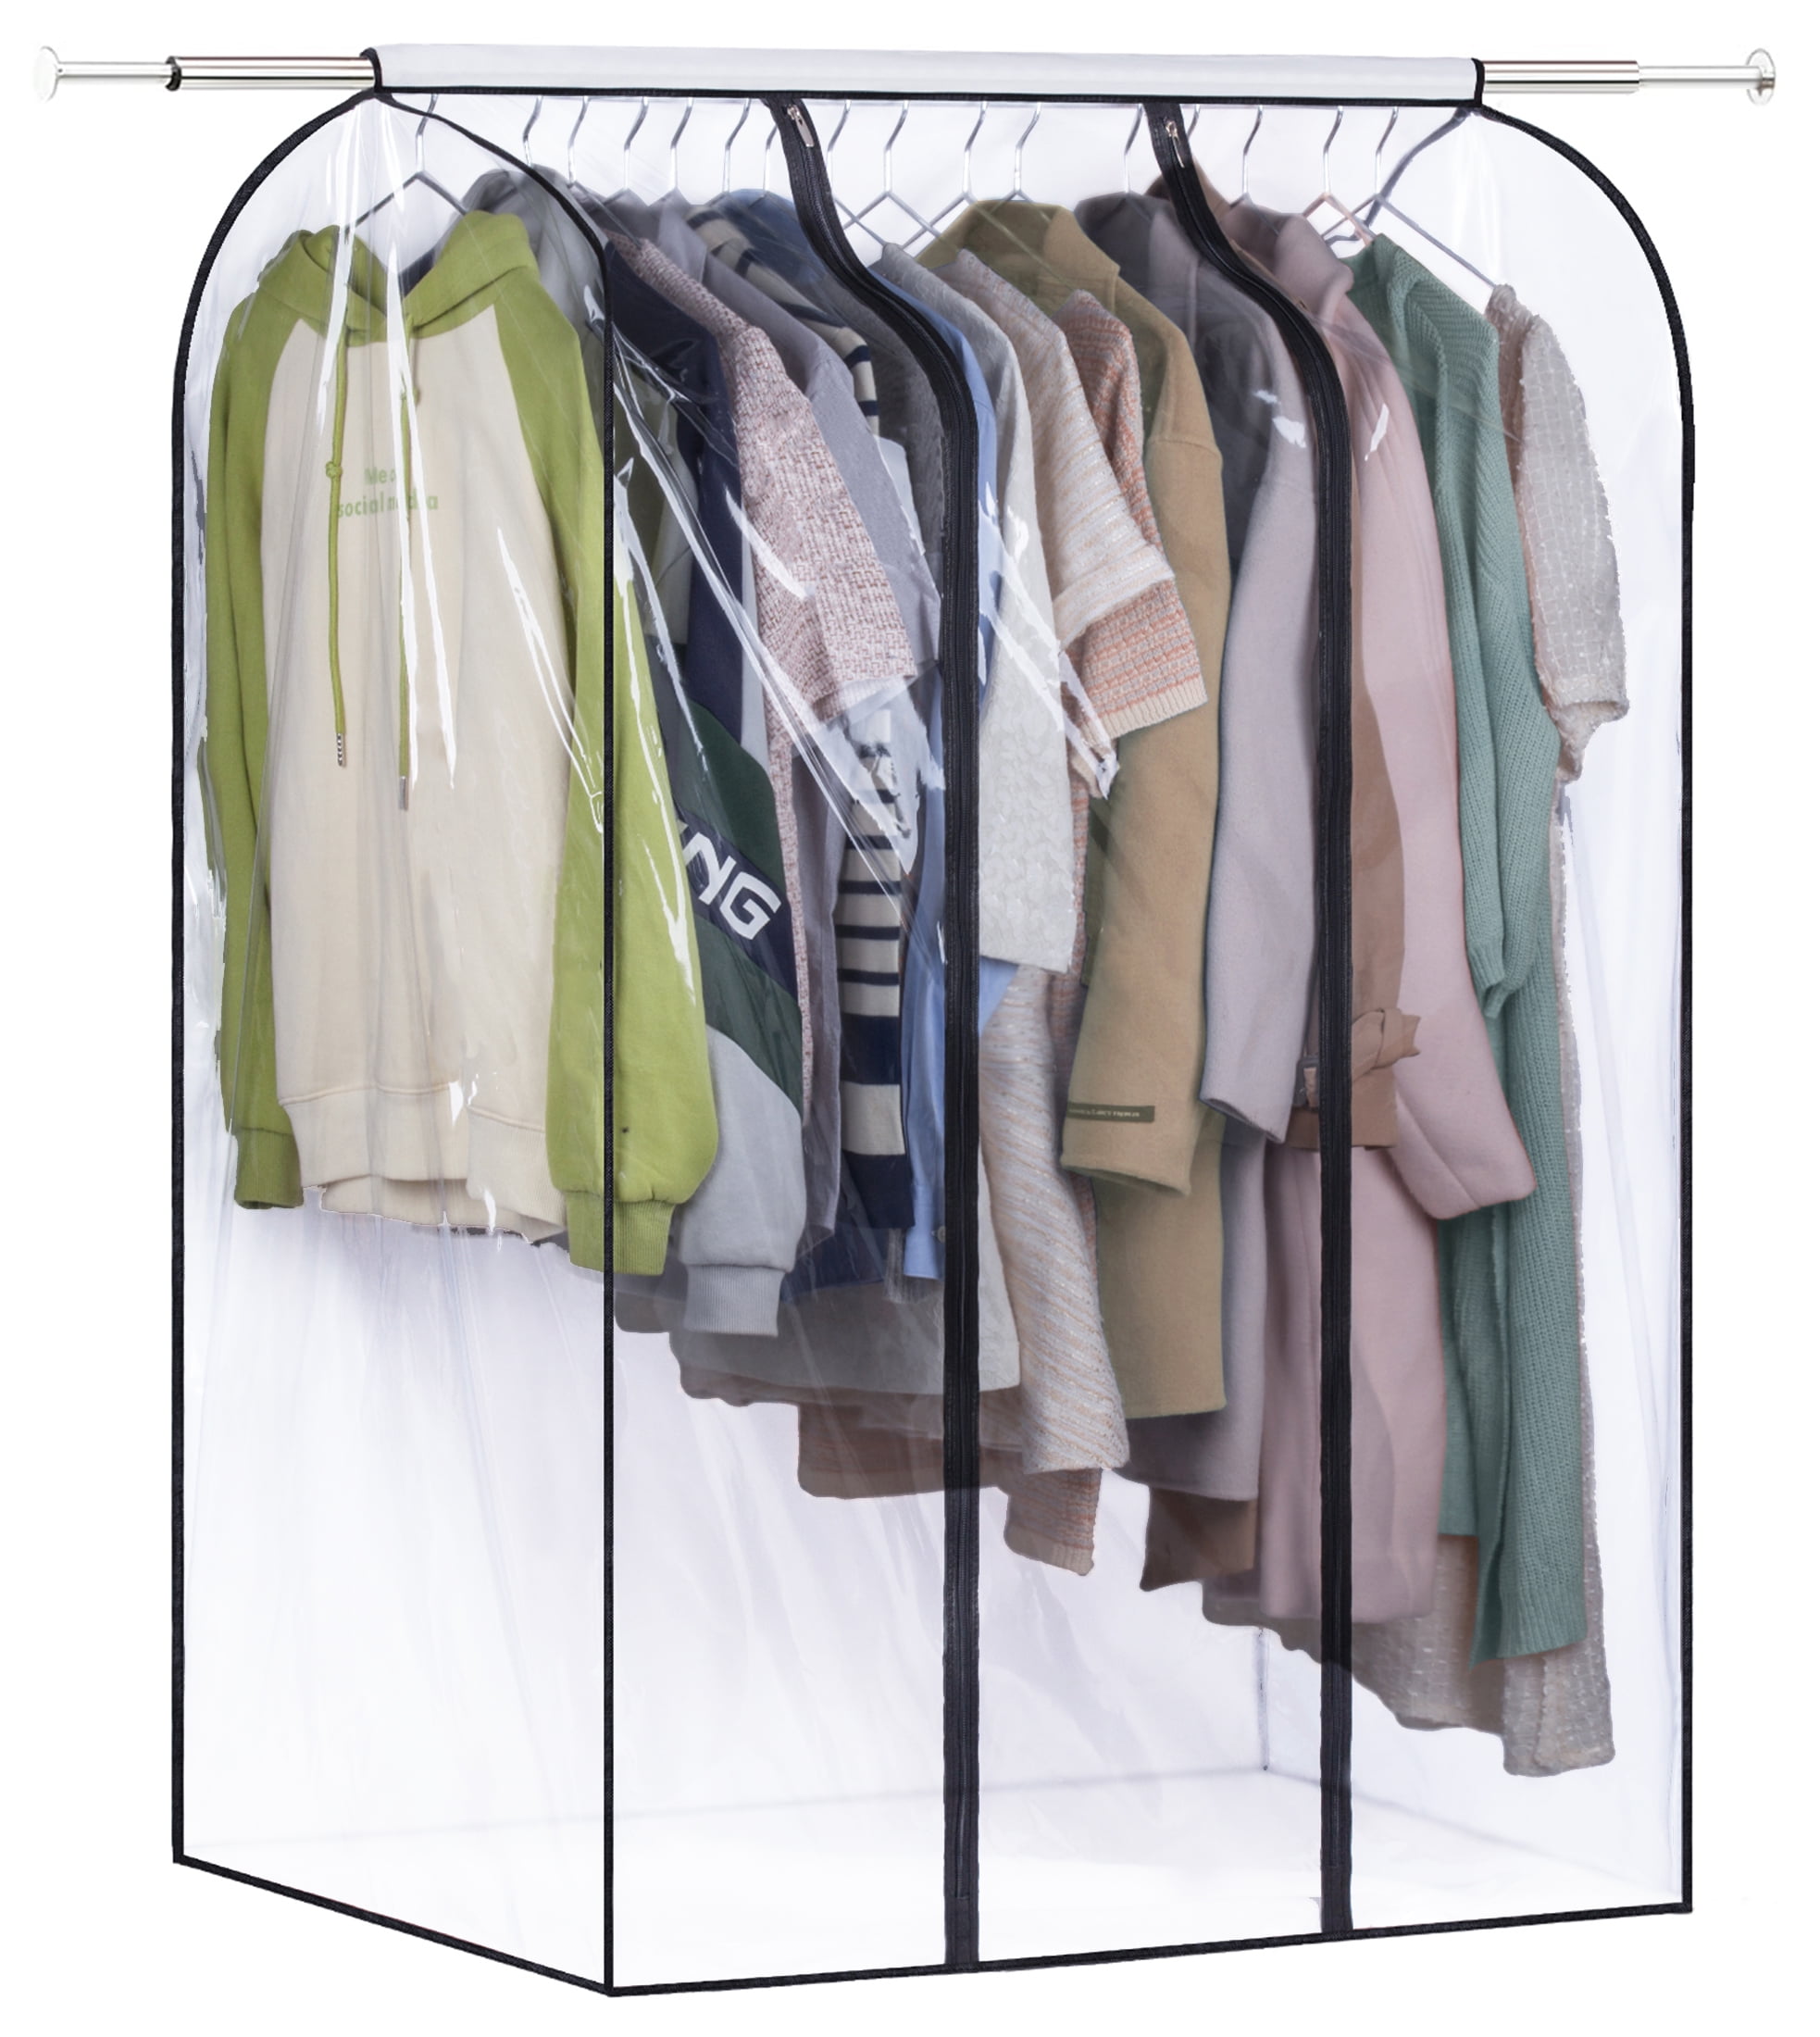 KEEGH Hanging Garment Rack Cover Large Suit Bags for Closet with Clear Window 40 Inches Grey Clothes Dust Cover for Shirt Dress 